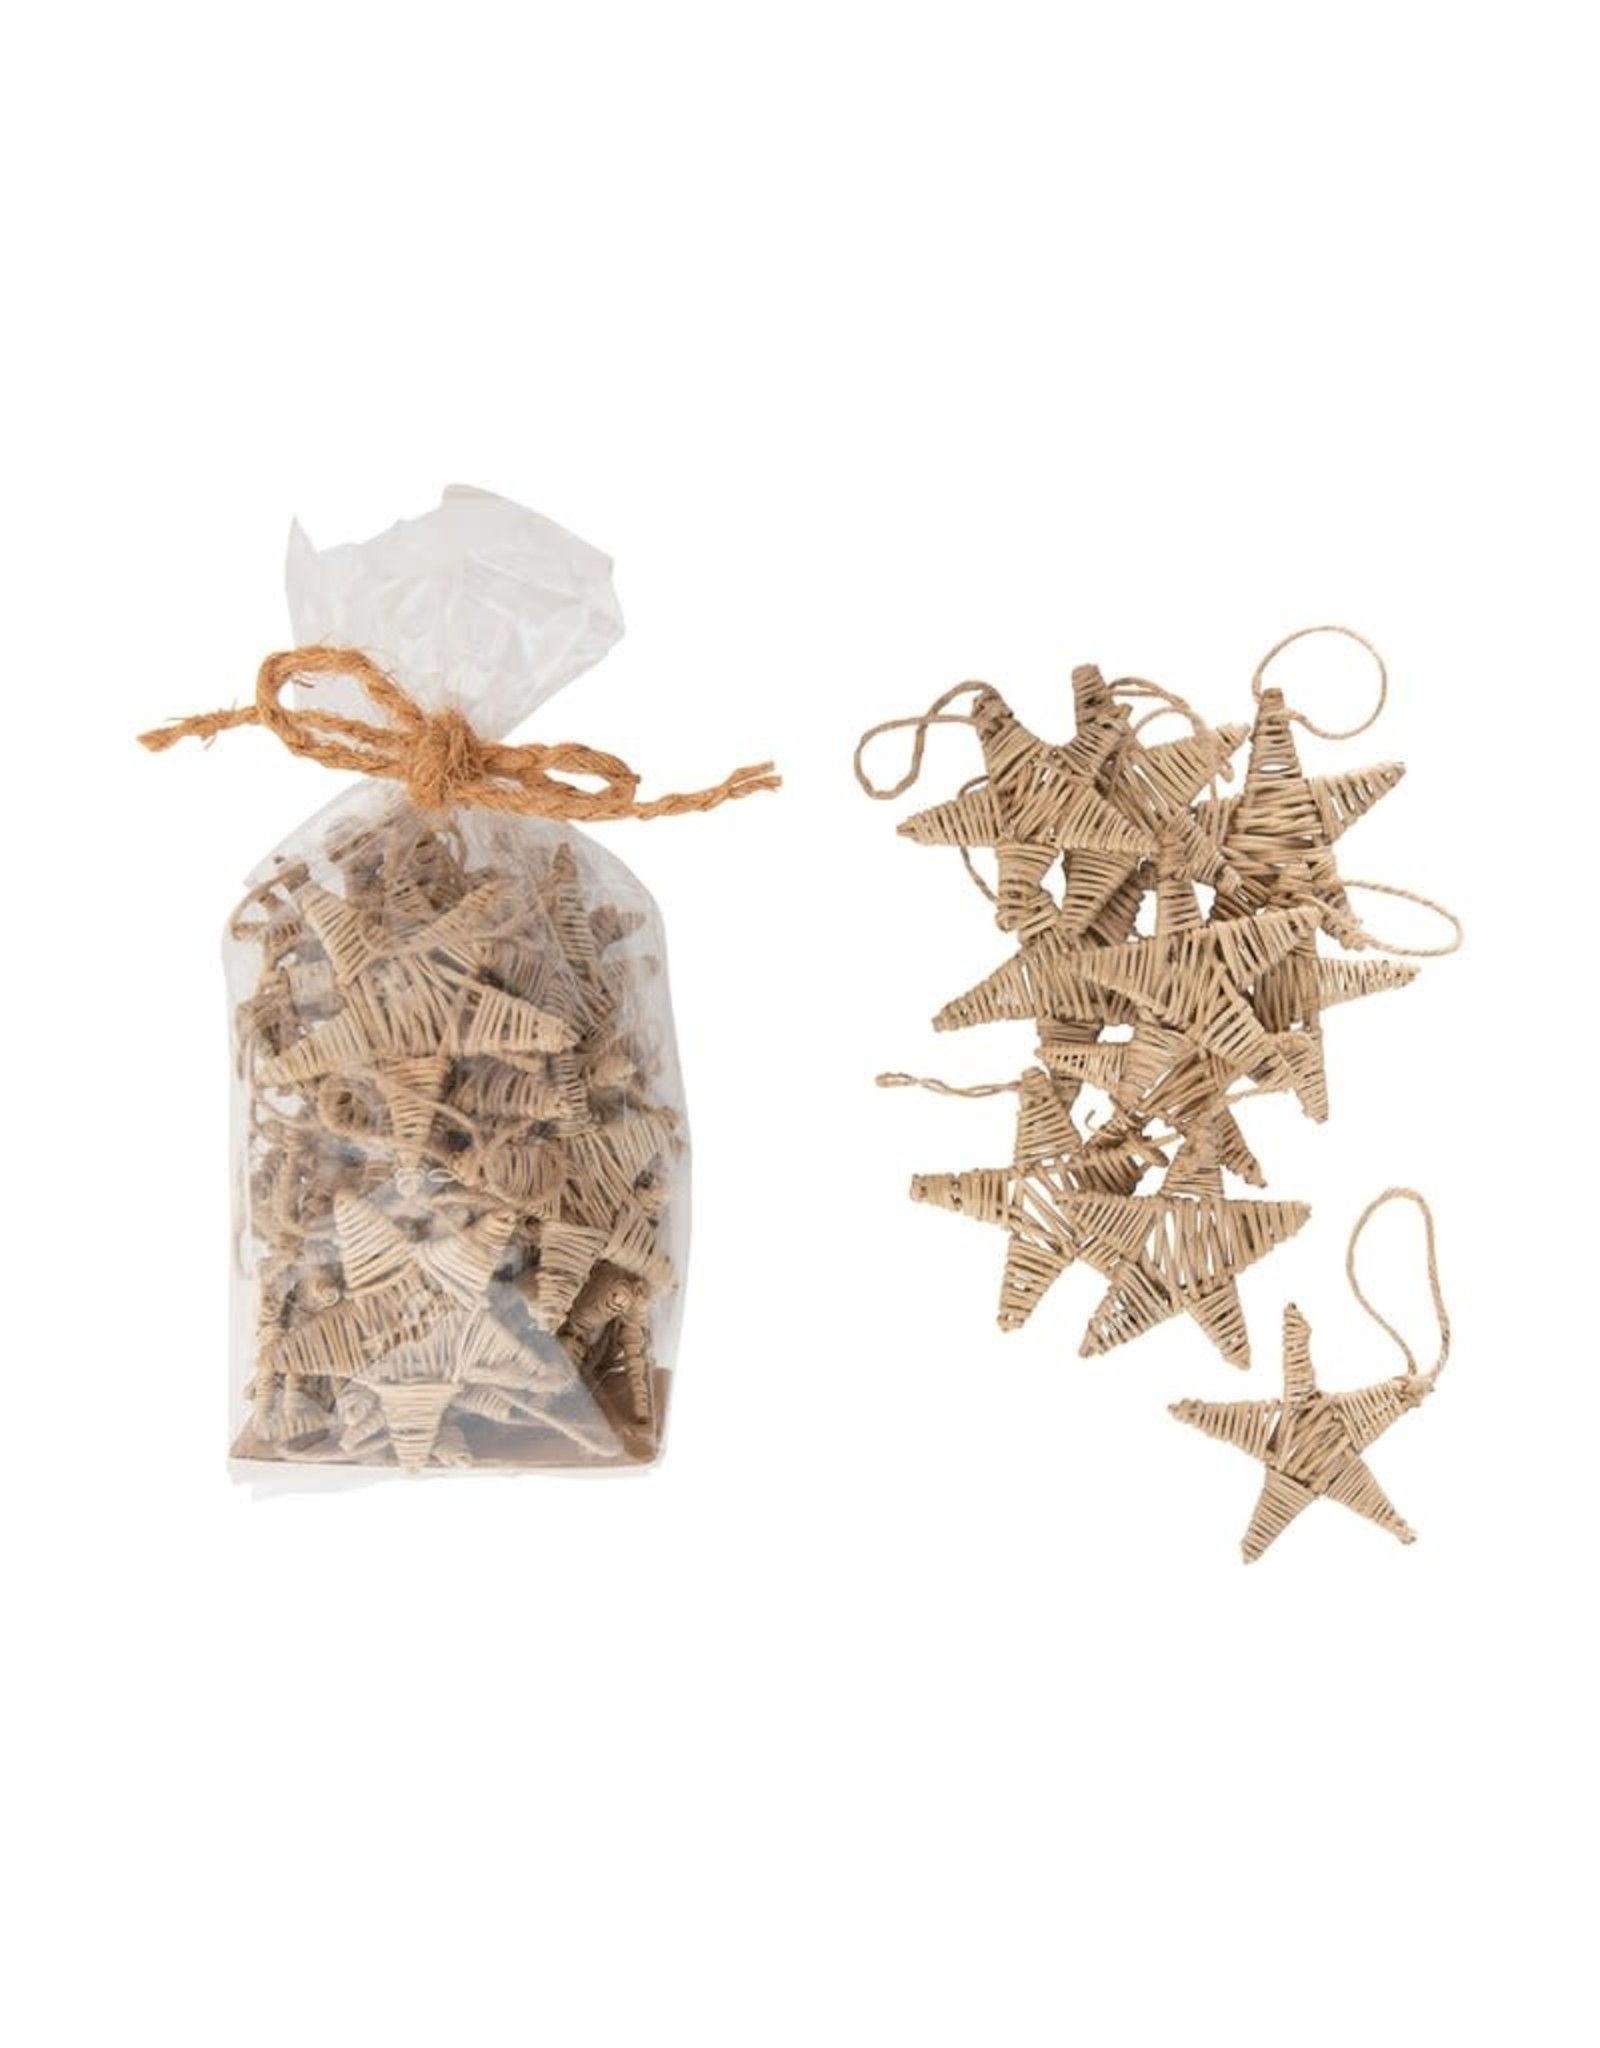 The Florist & The Merchant Dried Natural Lata Star Ornaments in Bag, 40 pieces